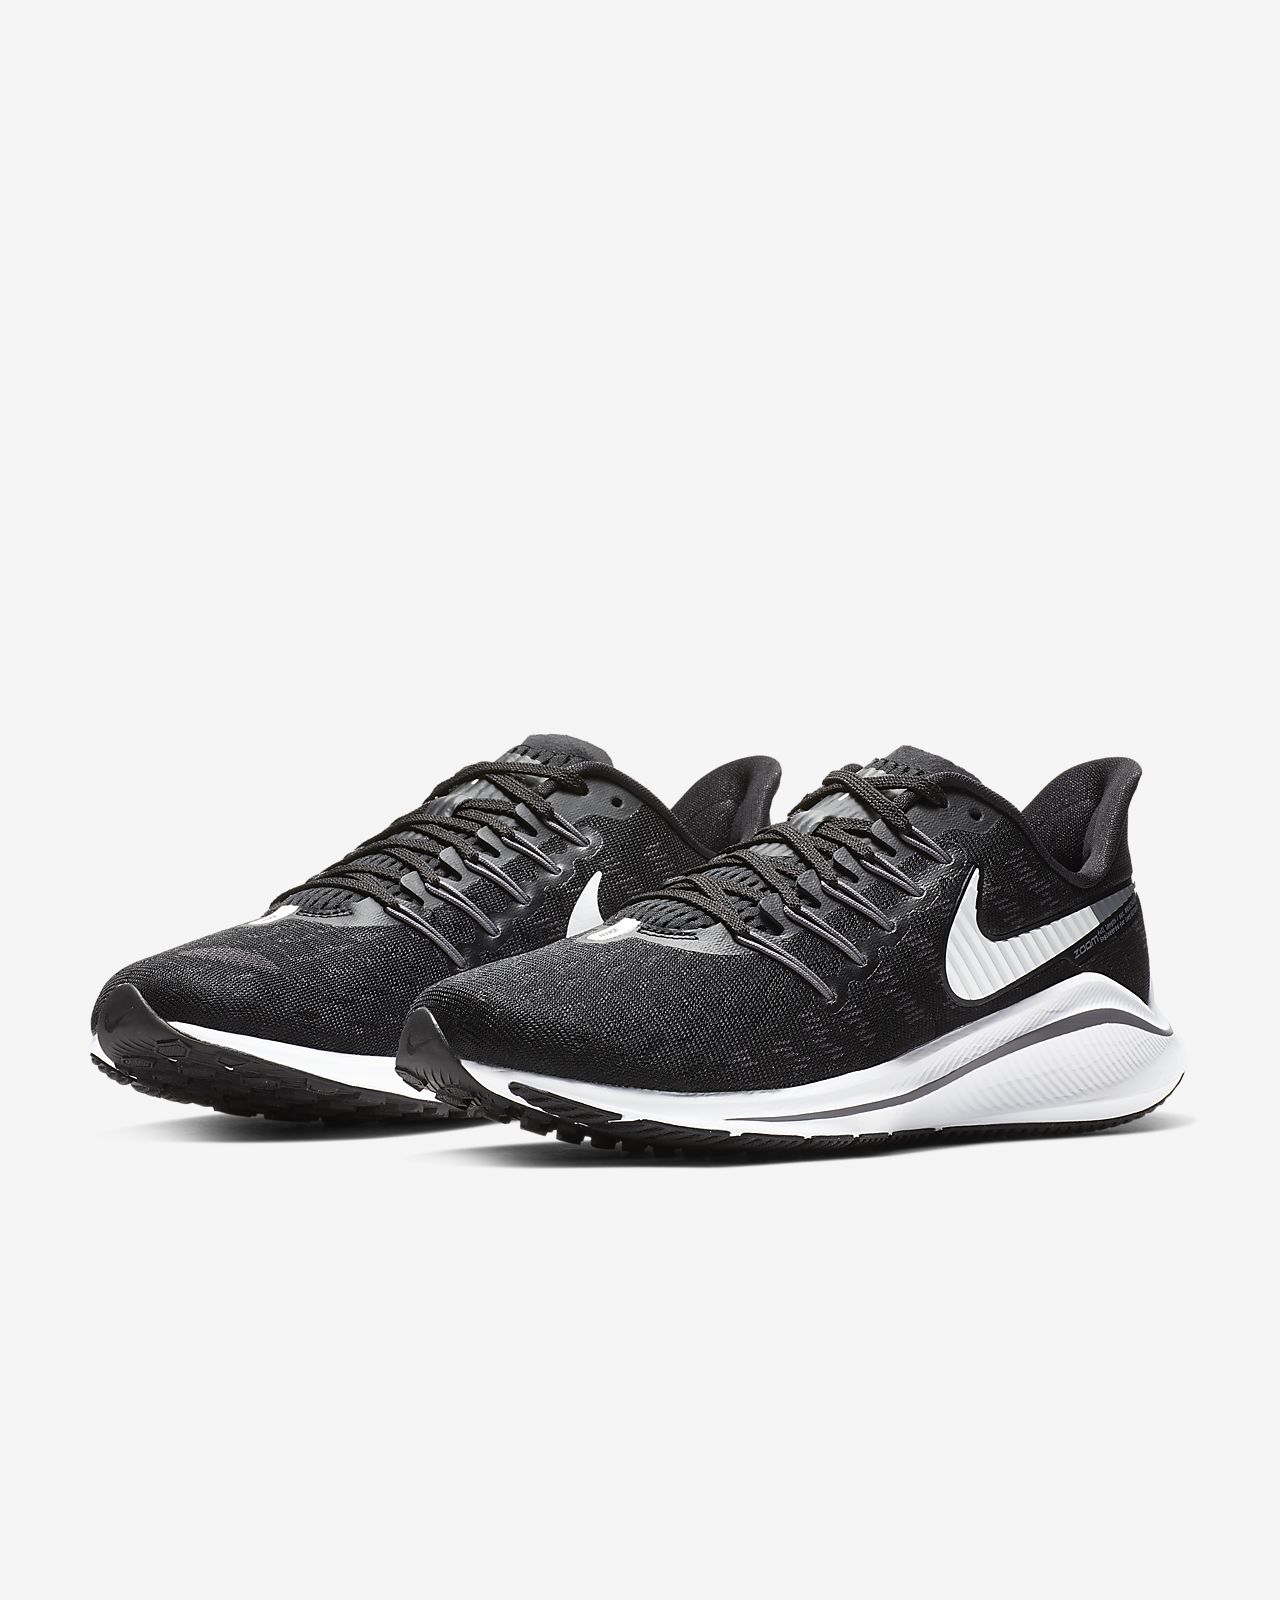 Chaussure de running Nike Air Zoom Vomero 14 pour Femme. Nike FR